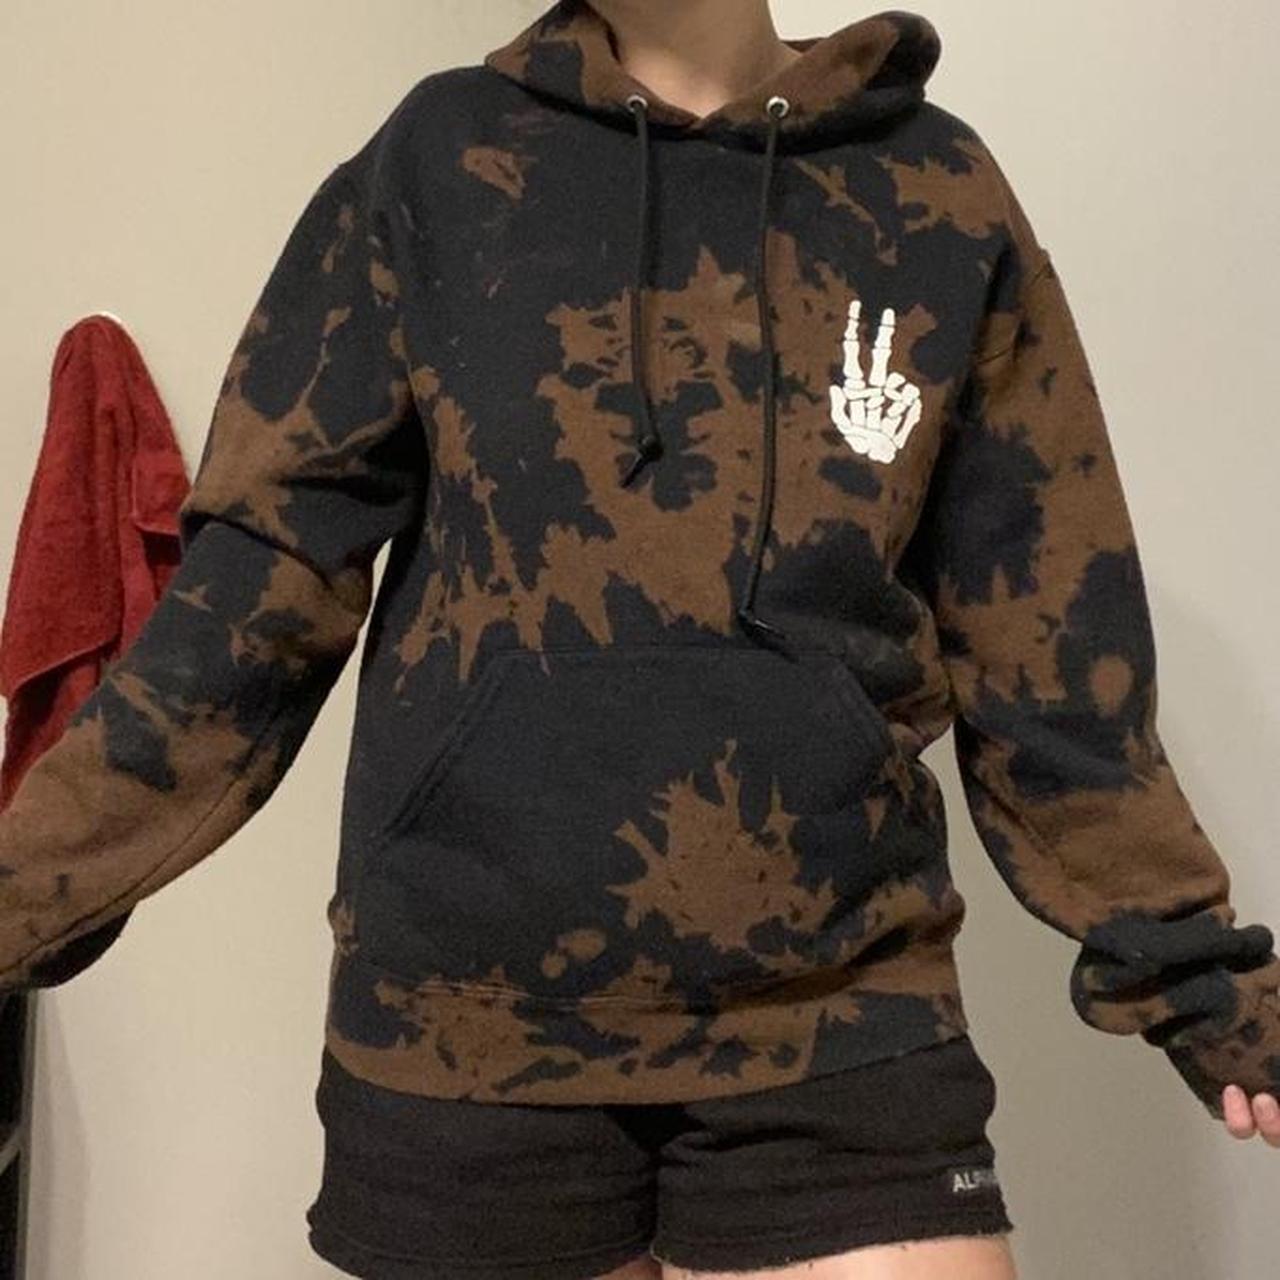 Product Image 3 - Size small hoodie from Marshall’s
Great